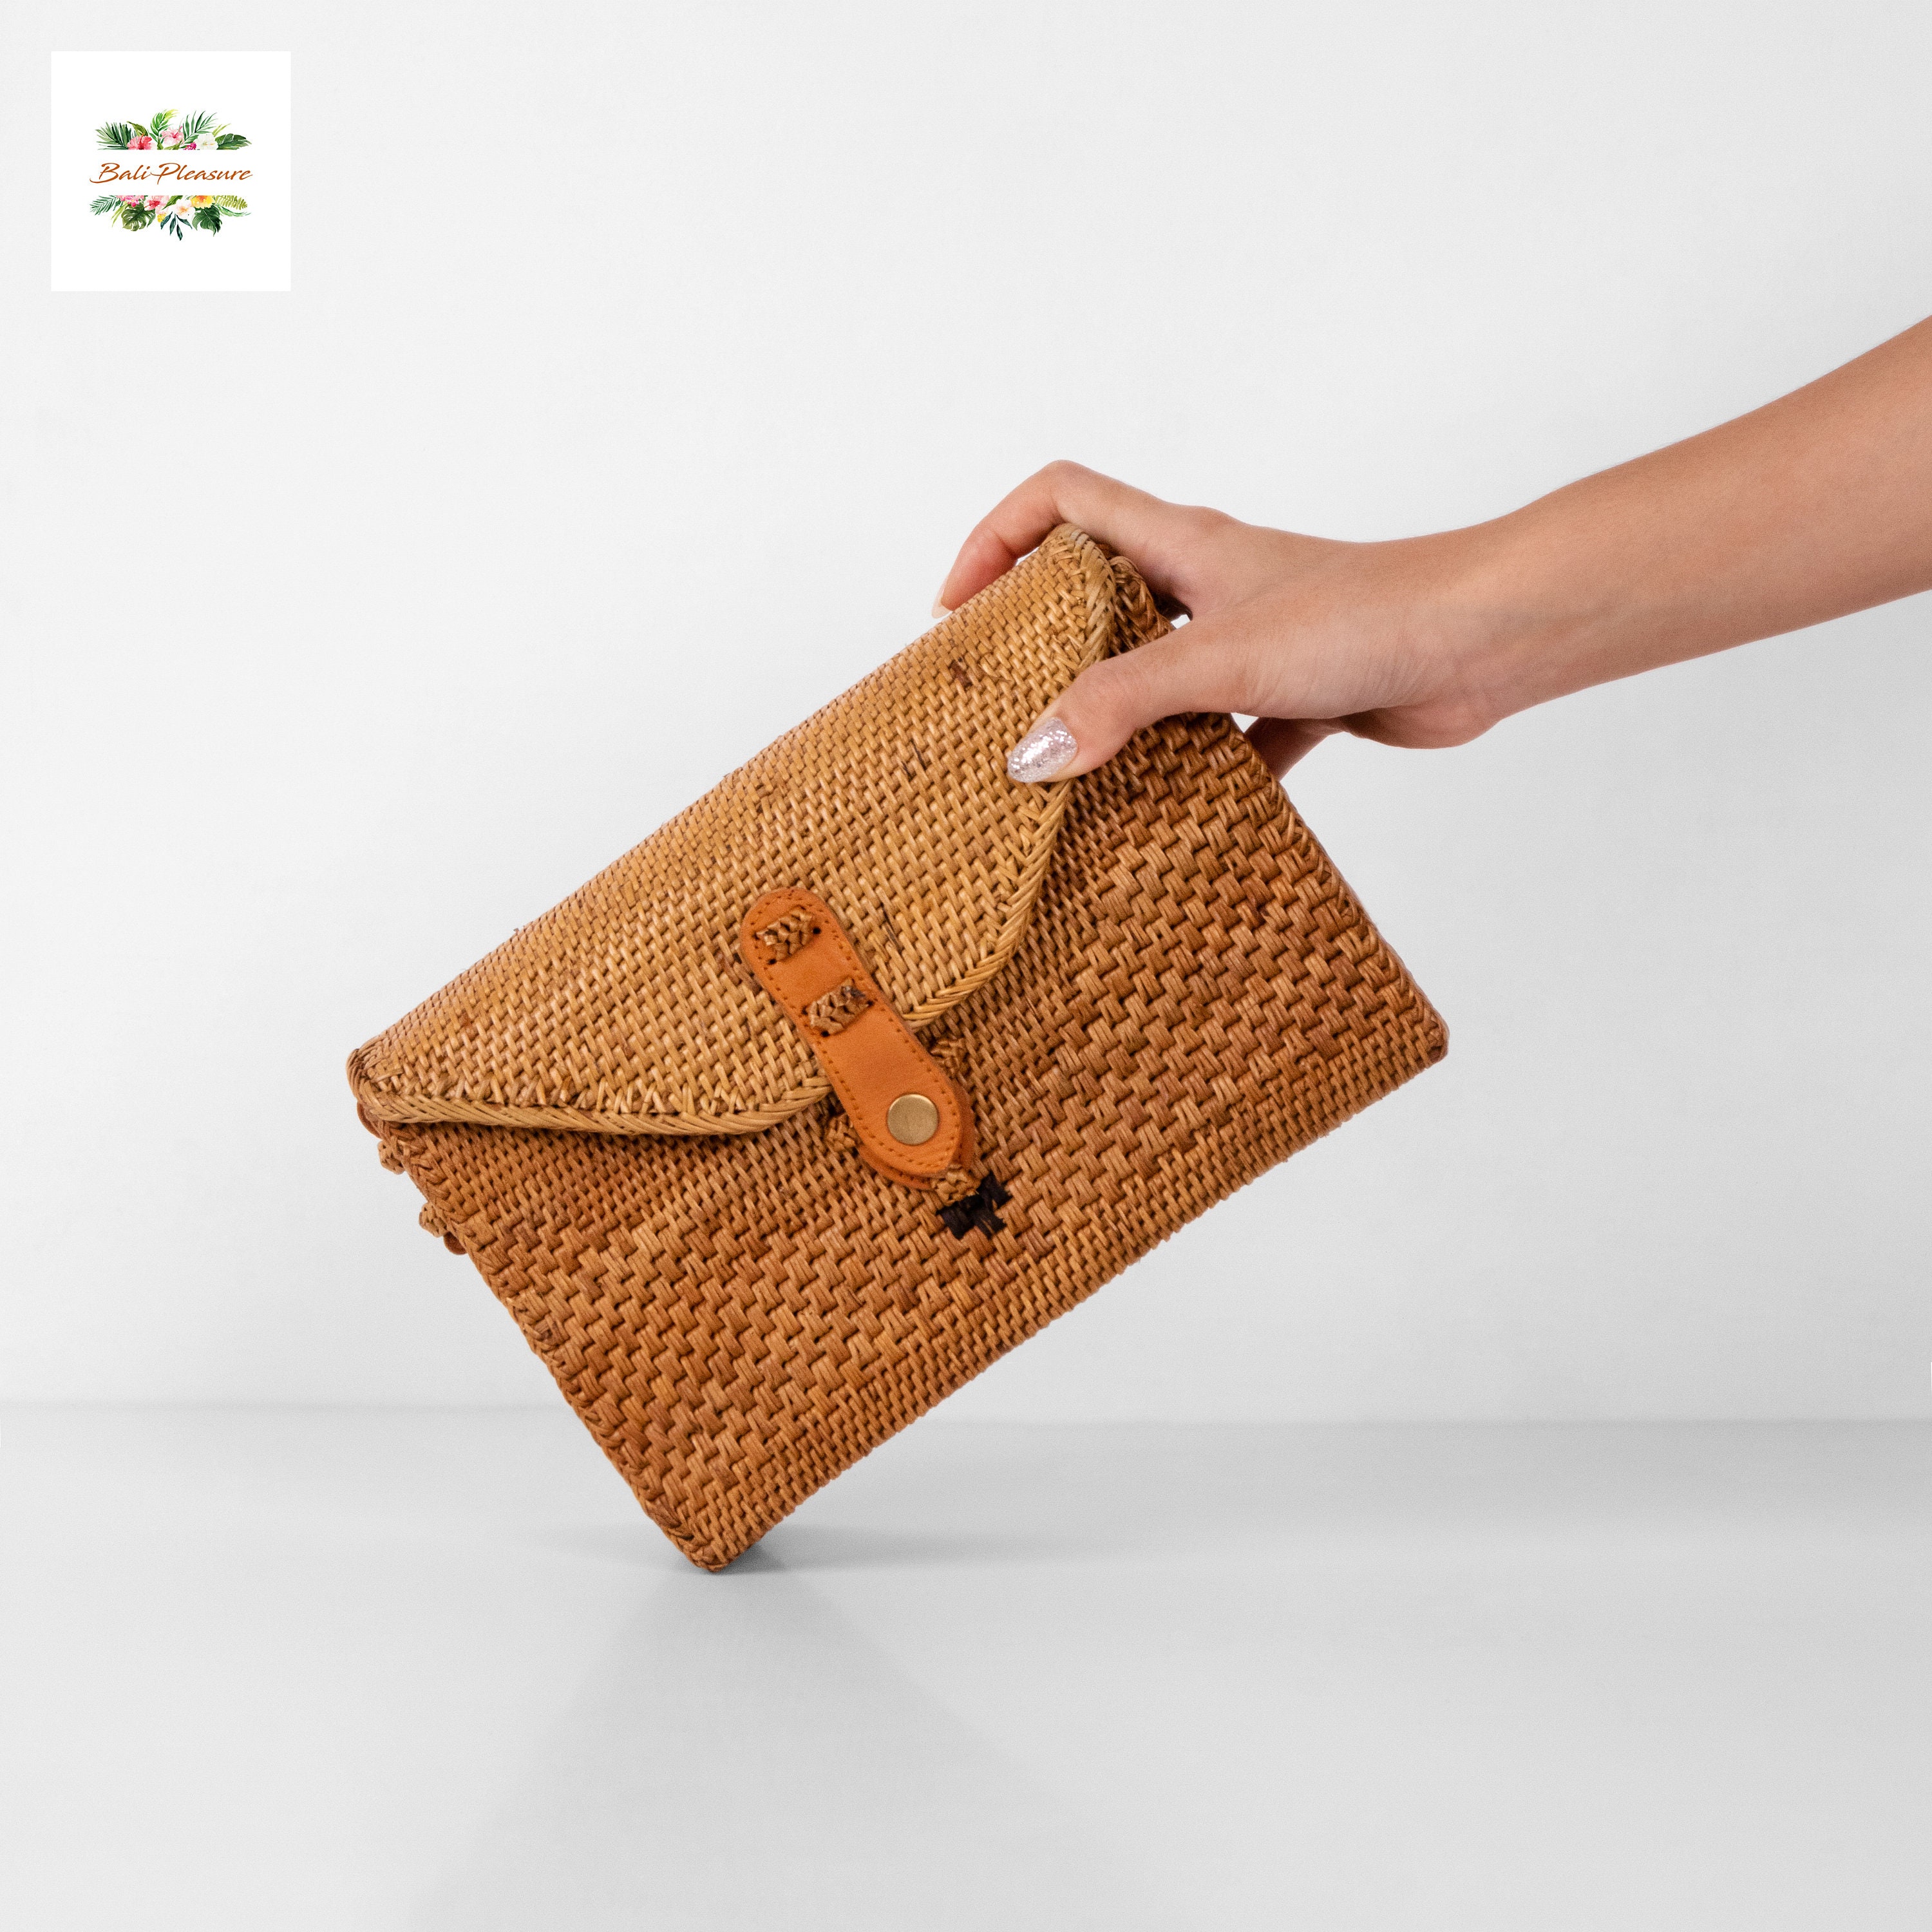 Handwoven Tan Rattan Envelope Clutch Bag from Bali, 'Casual Afternoon